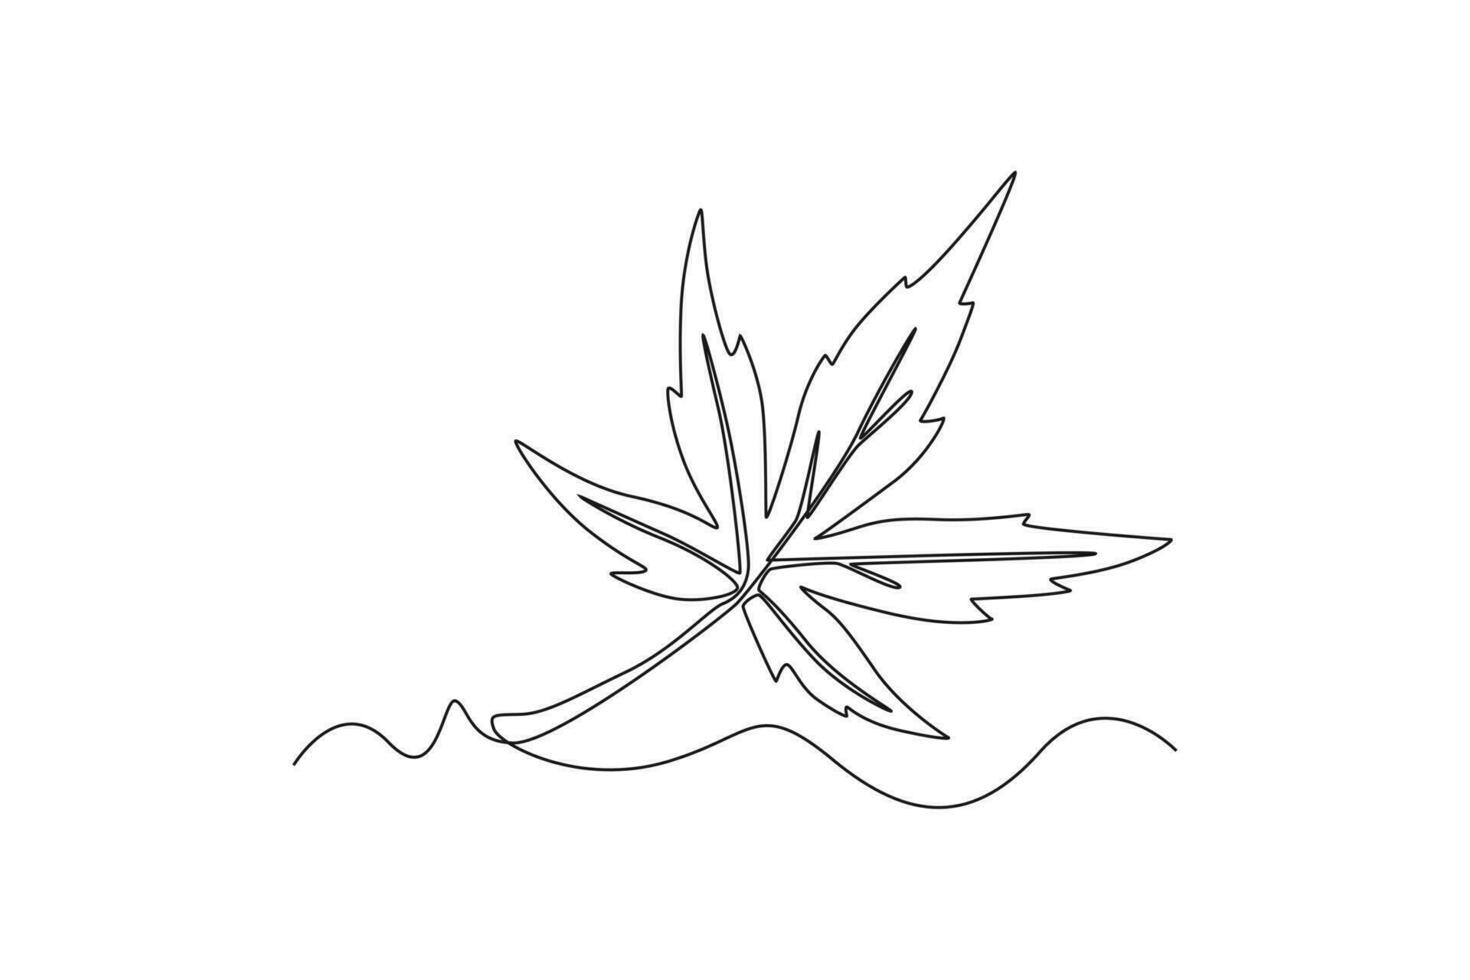 Continuous one line drawing of autumn concept. Doodle vector illustration in simple linear style.